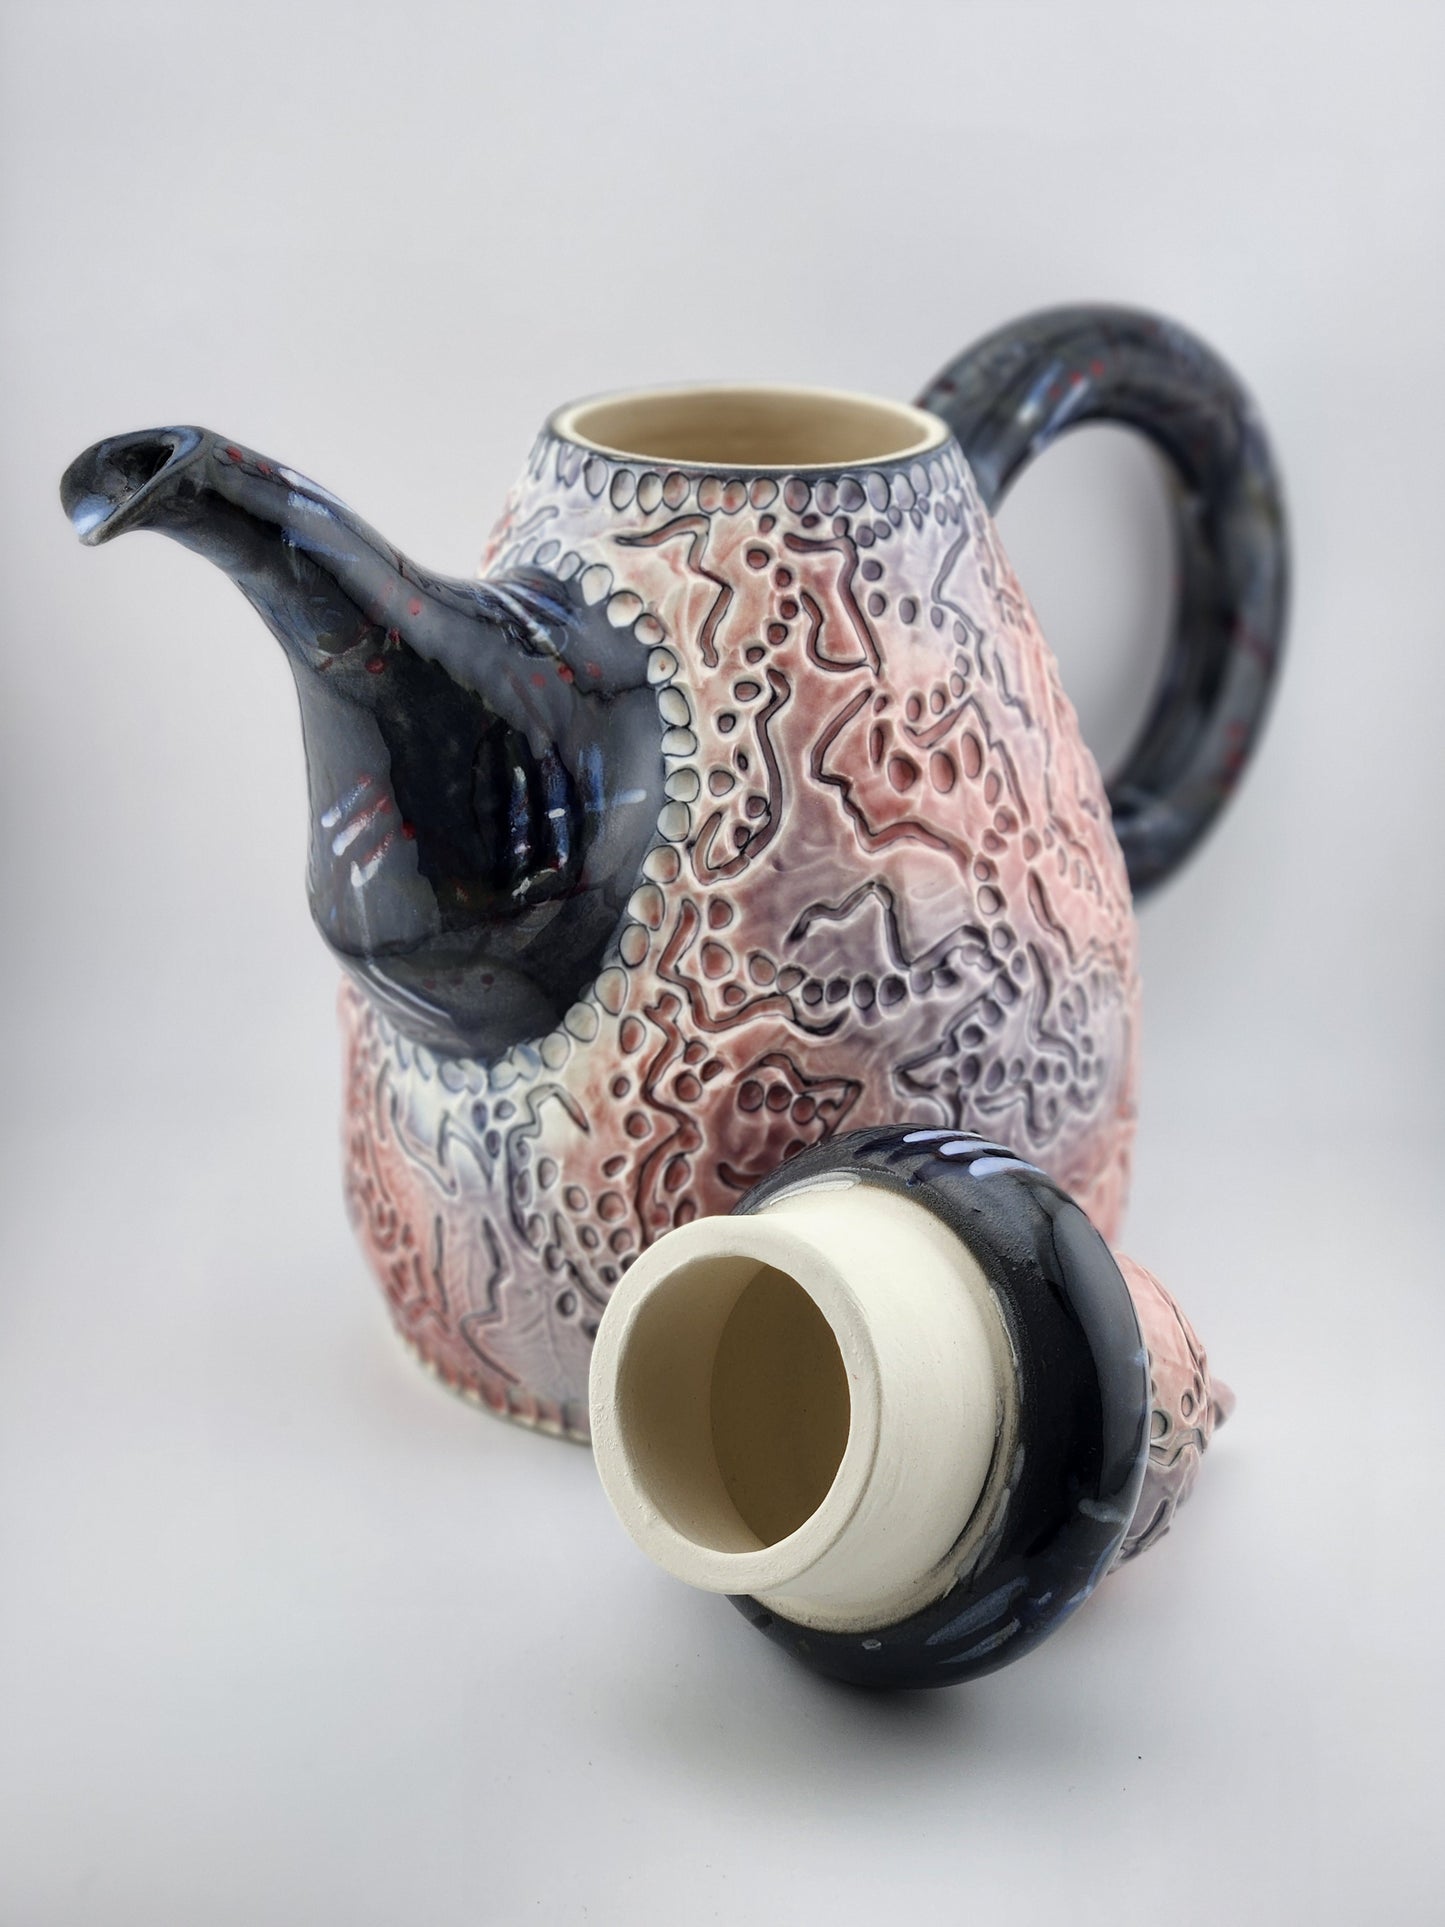 Carved Pink & Grey Teapot